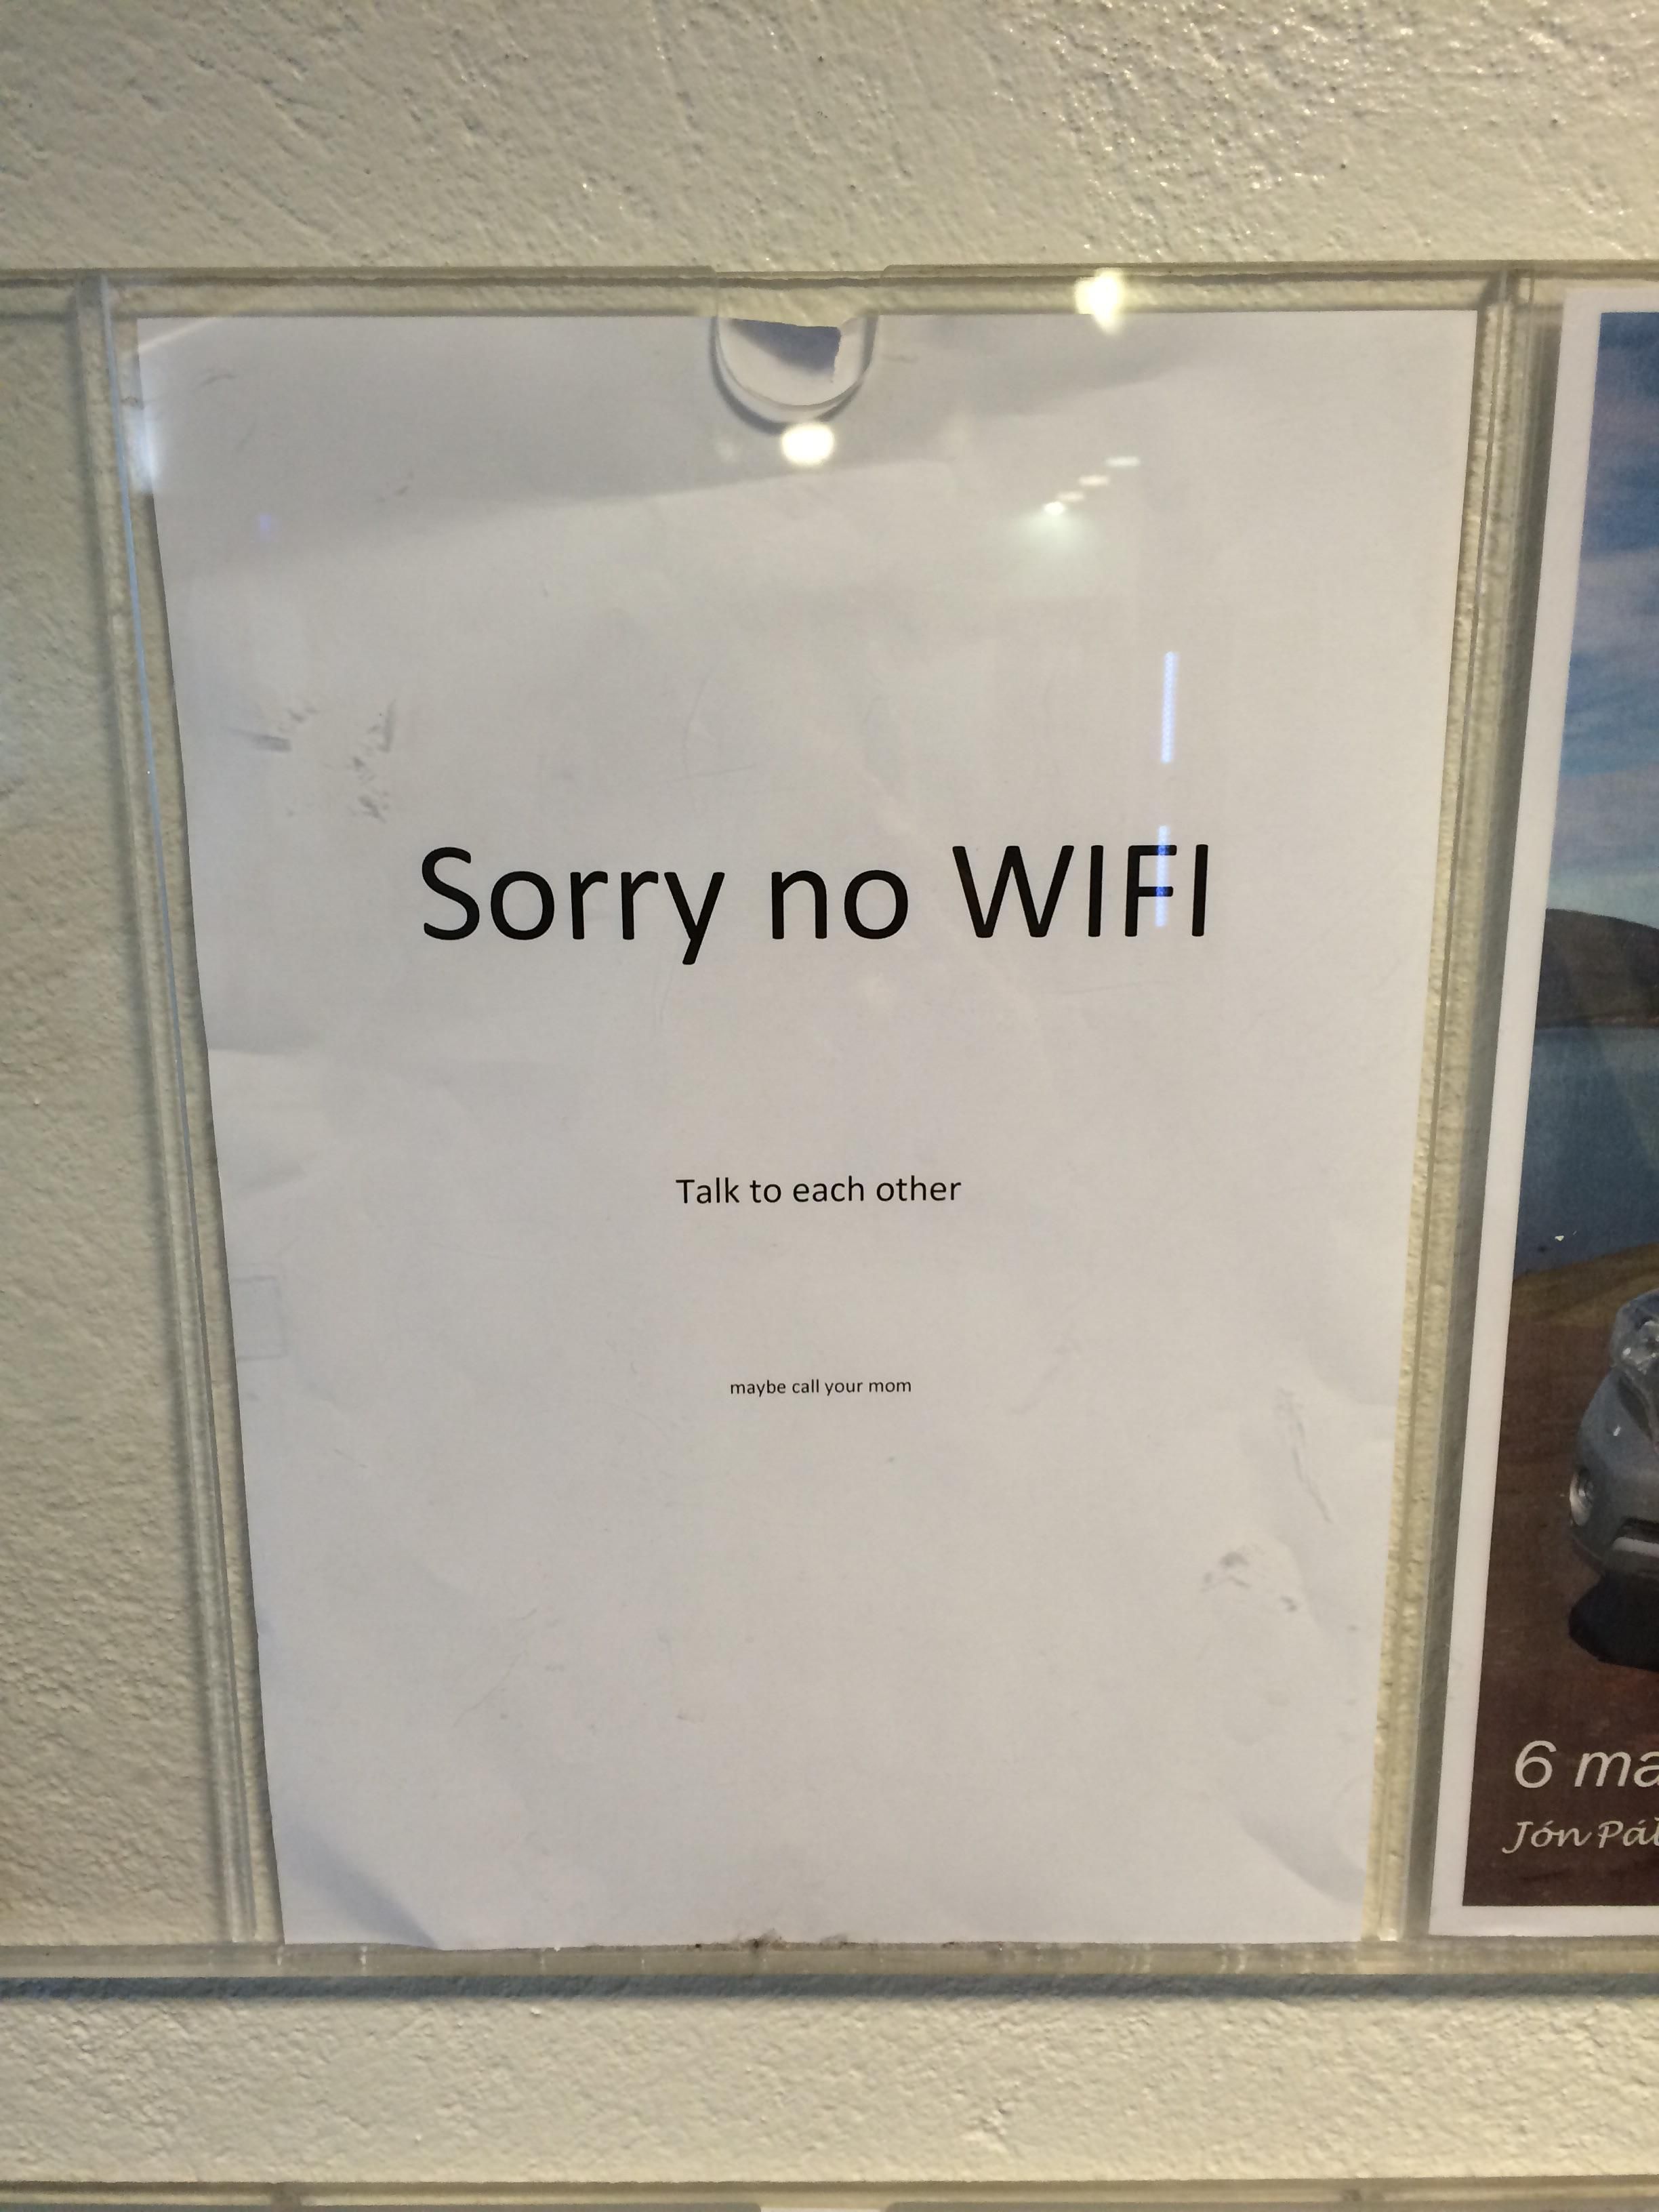 There is no wifi on the ferry in Iceland.